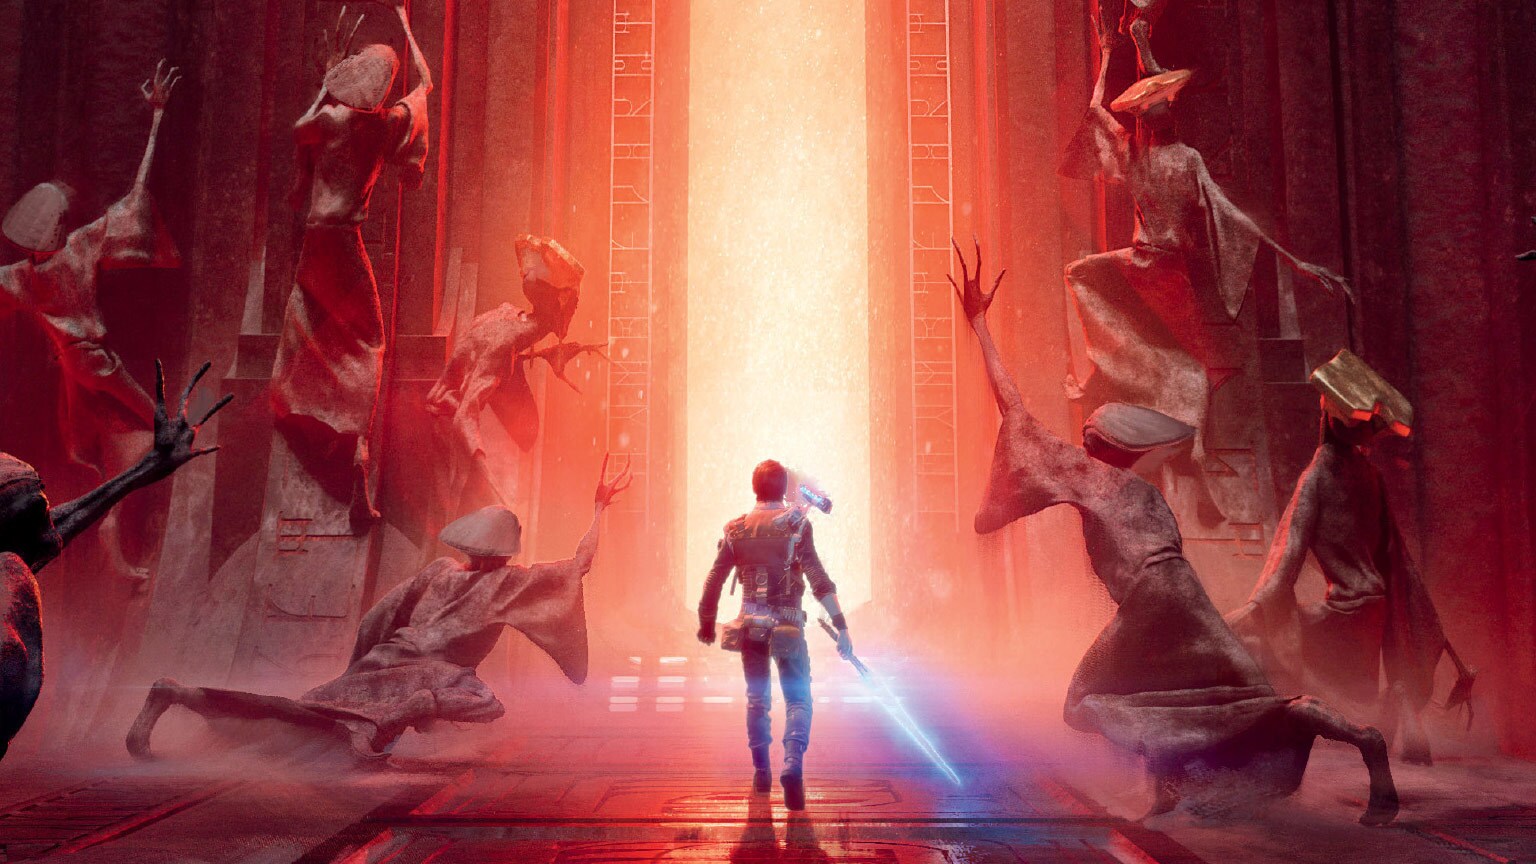 Check Out Never-Before-Seen Concept Art from The Art of Star Wars Jedi: Fallen Order - Exclusive